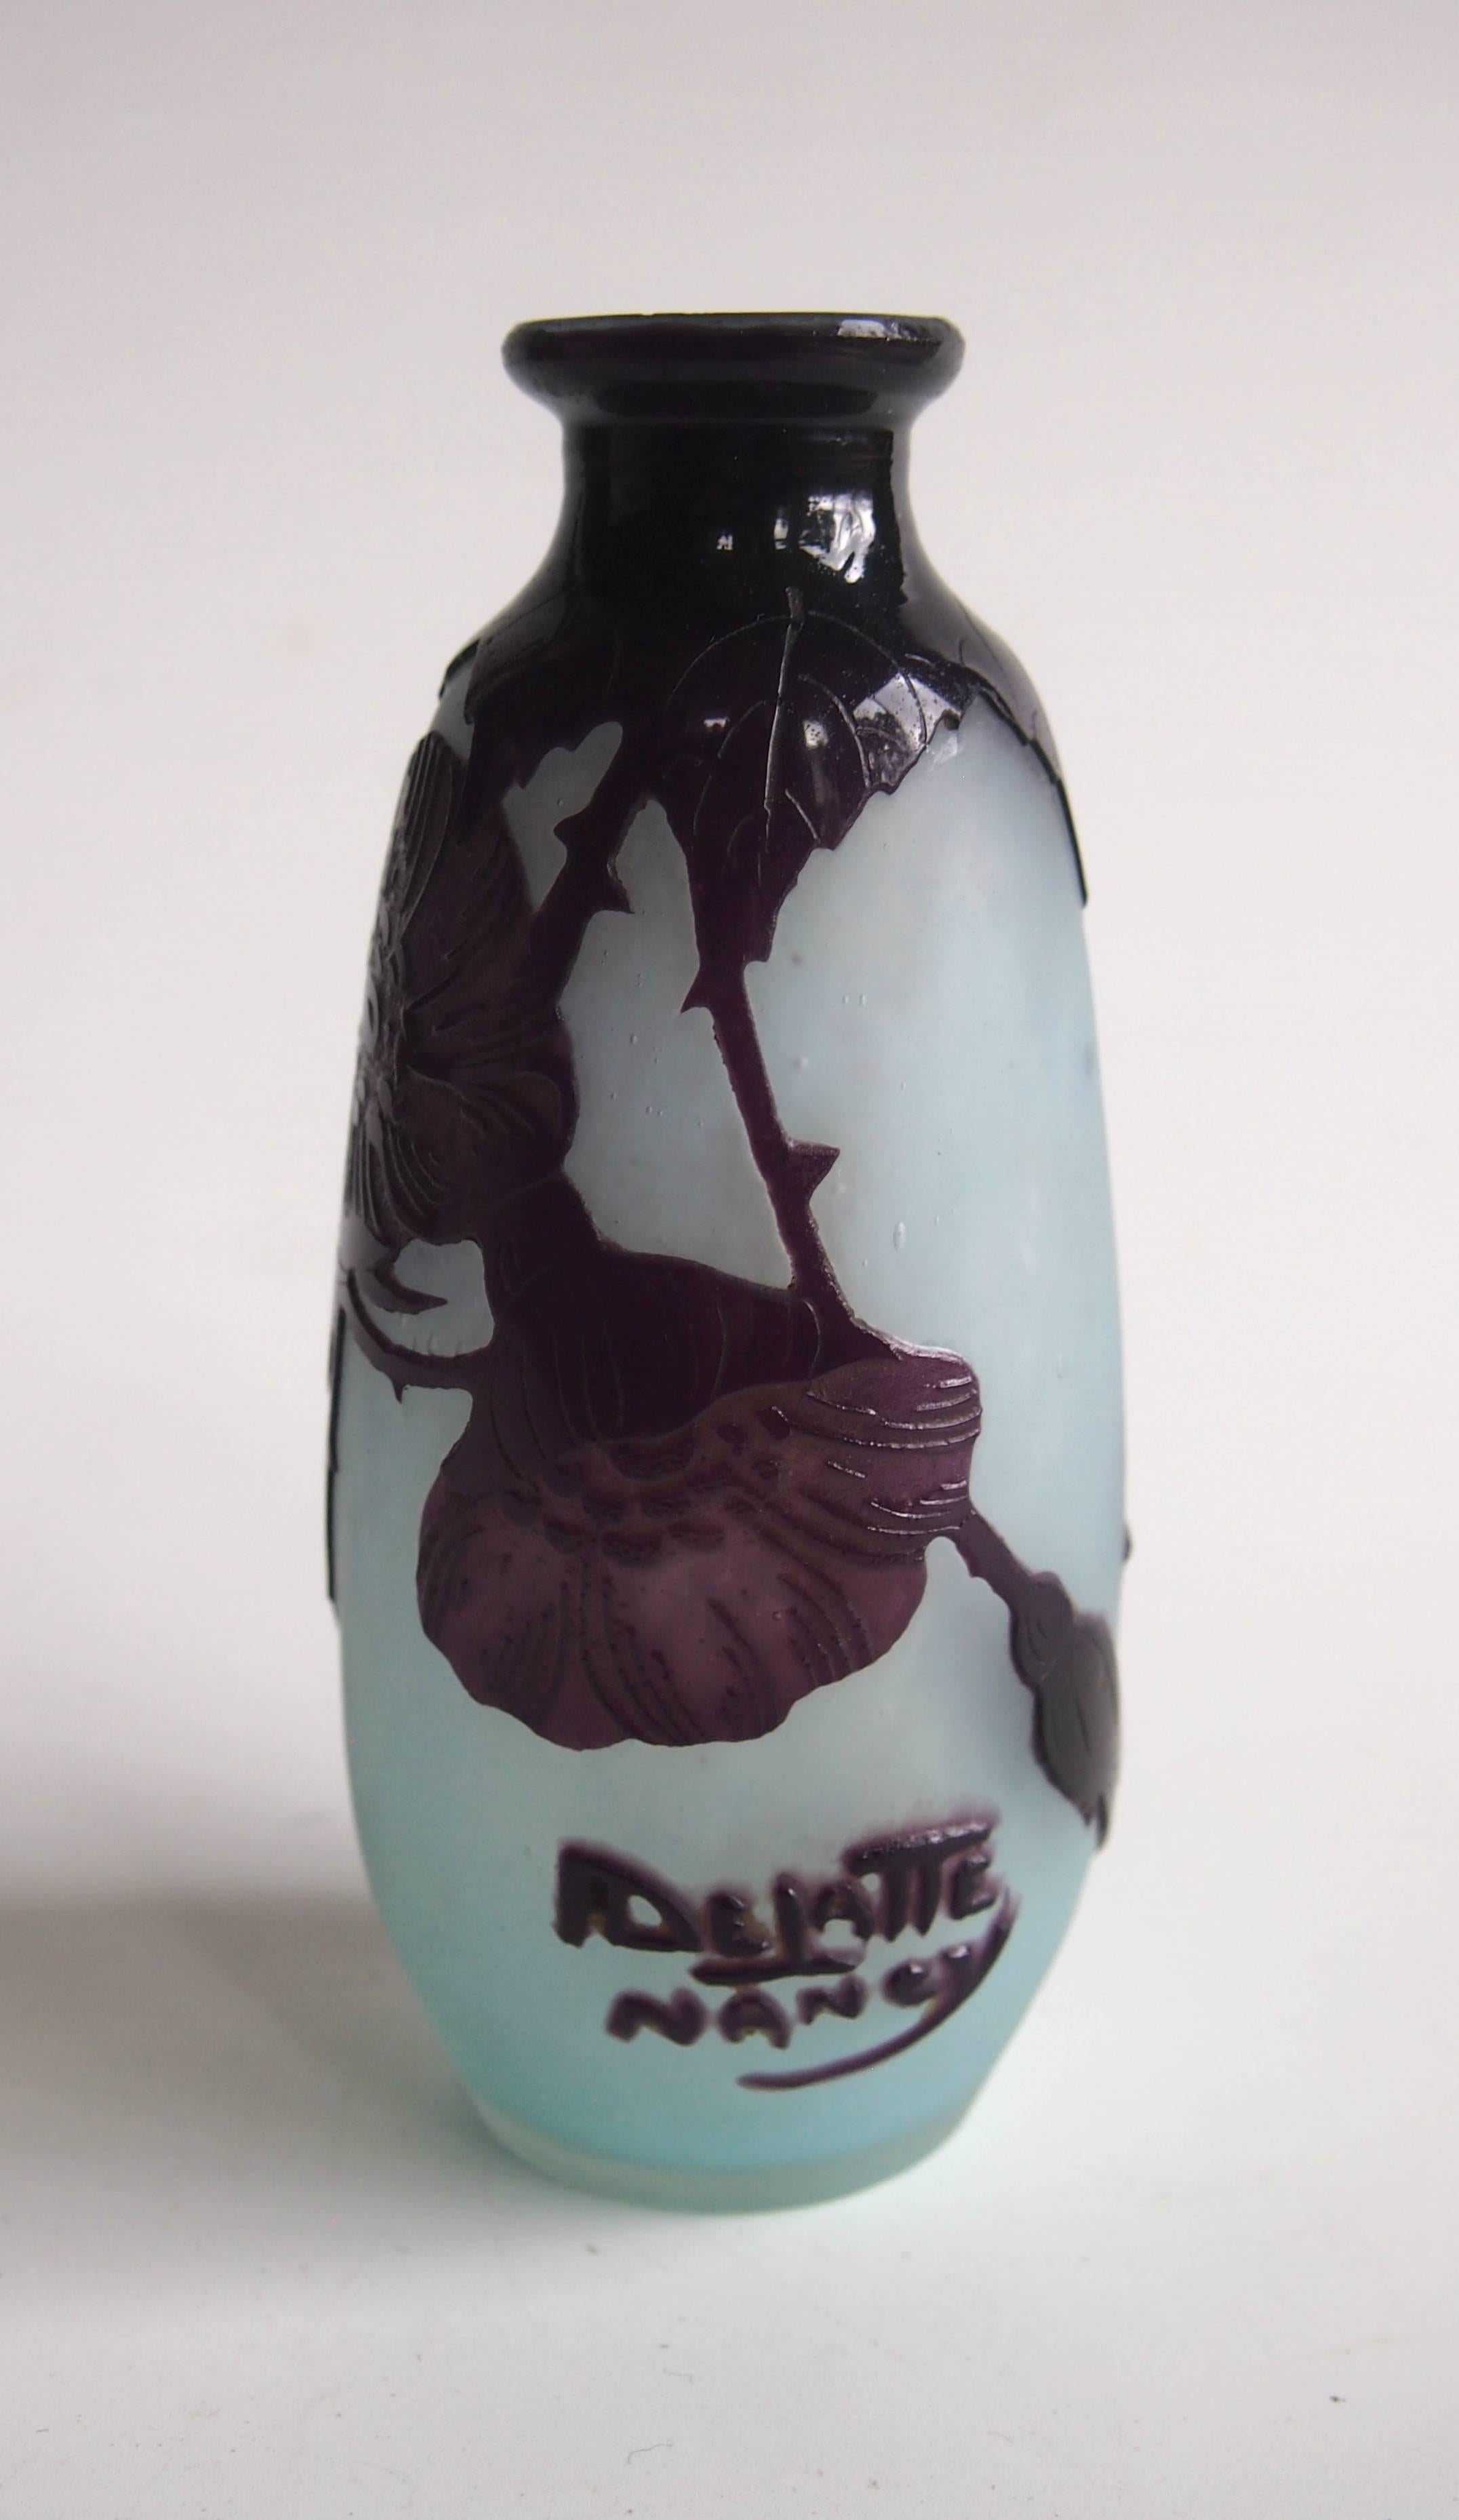 Superb Art Nouveau deep purple on pretty pale blue small cameo vase by Andre Delatte depicting flowers with prickly stems. Nicely signed in cameo see image 2

Andre Delatte was one of the best of the French cameo makers in the later Art Nouveau